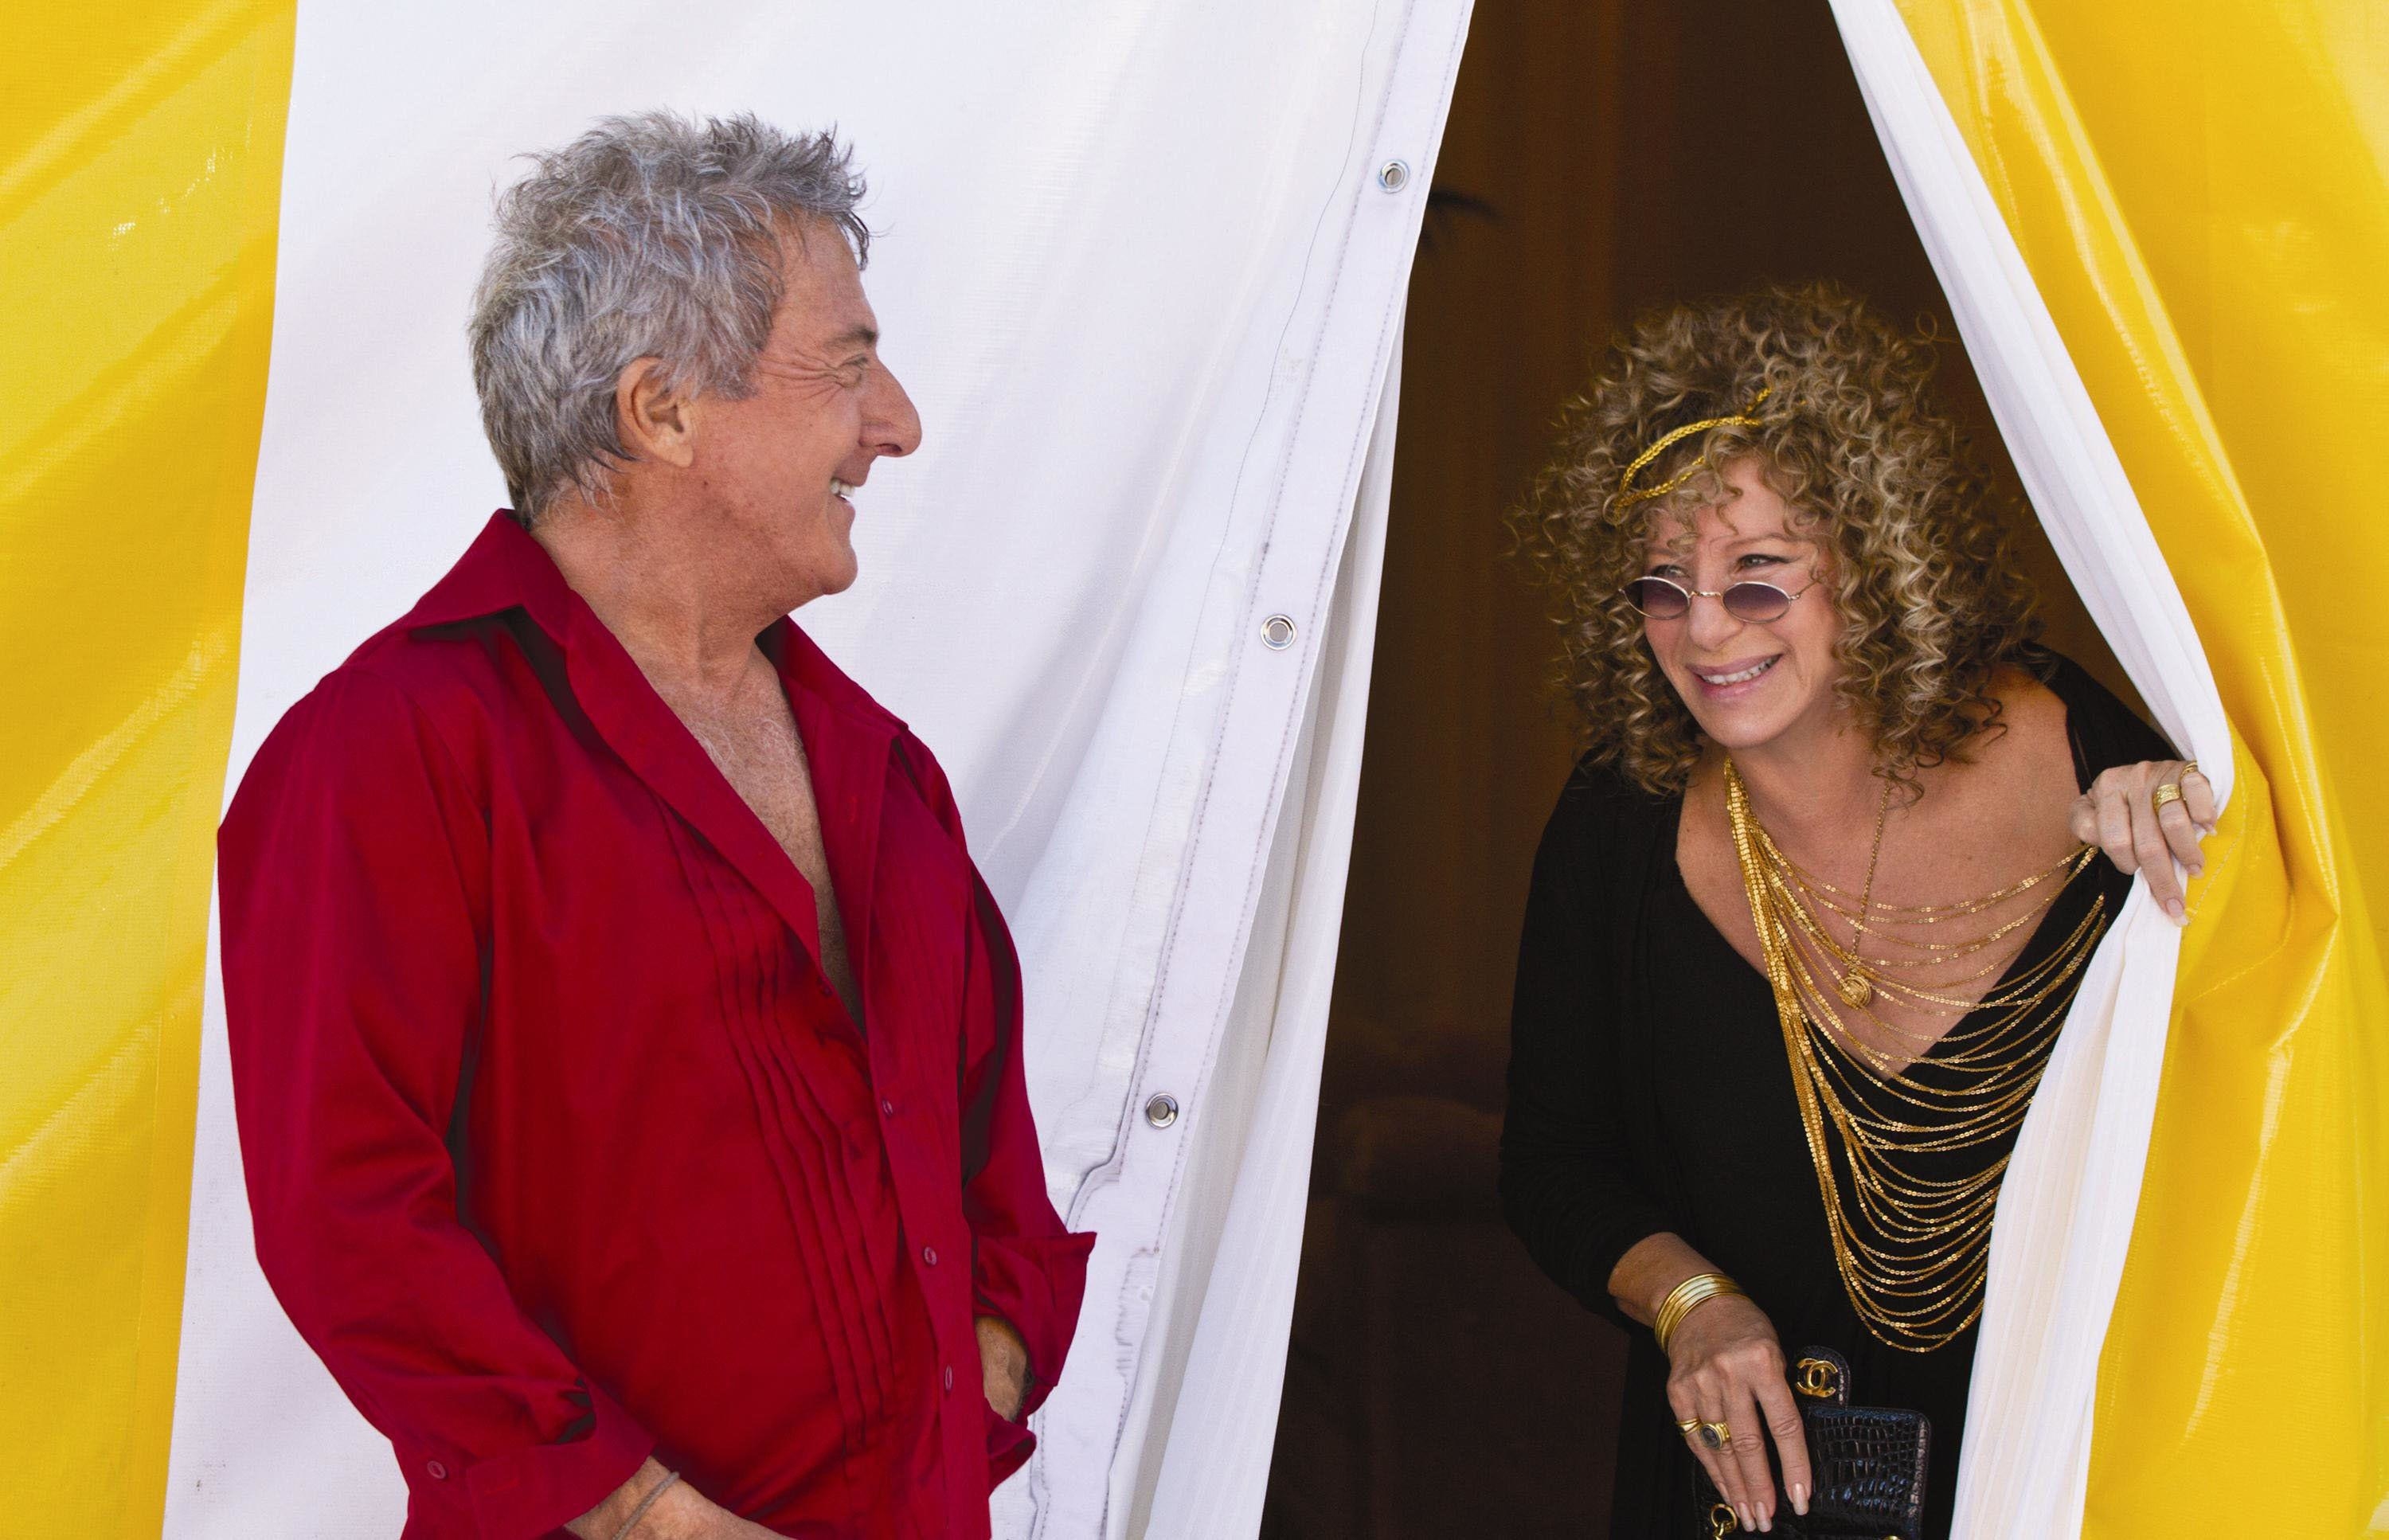 Dustin Hoffman and Barbara Streisand smile at one another near a tent